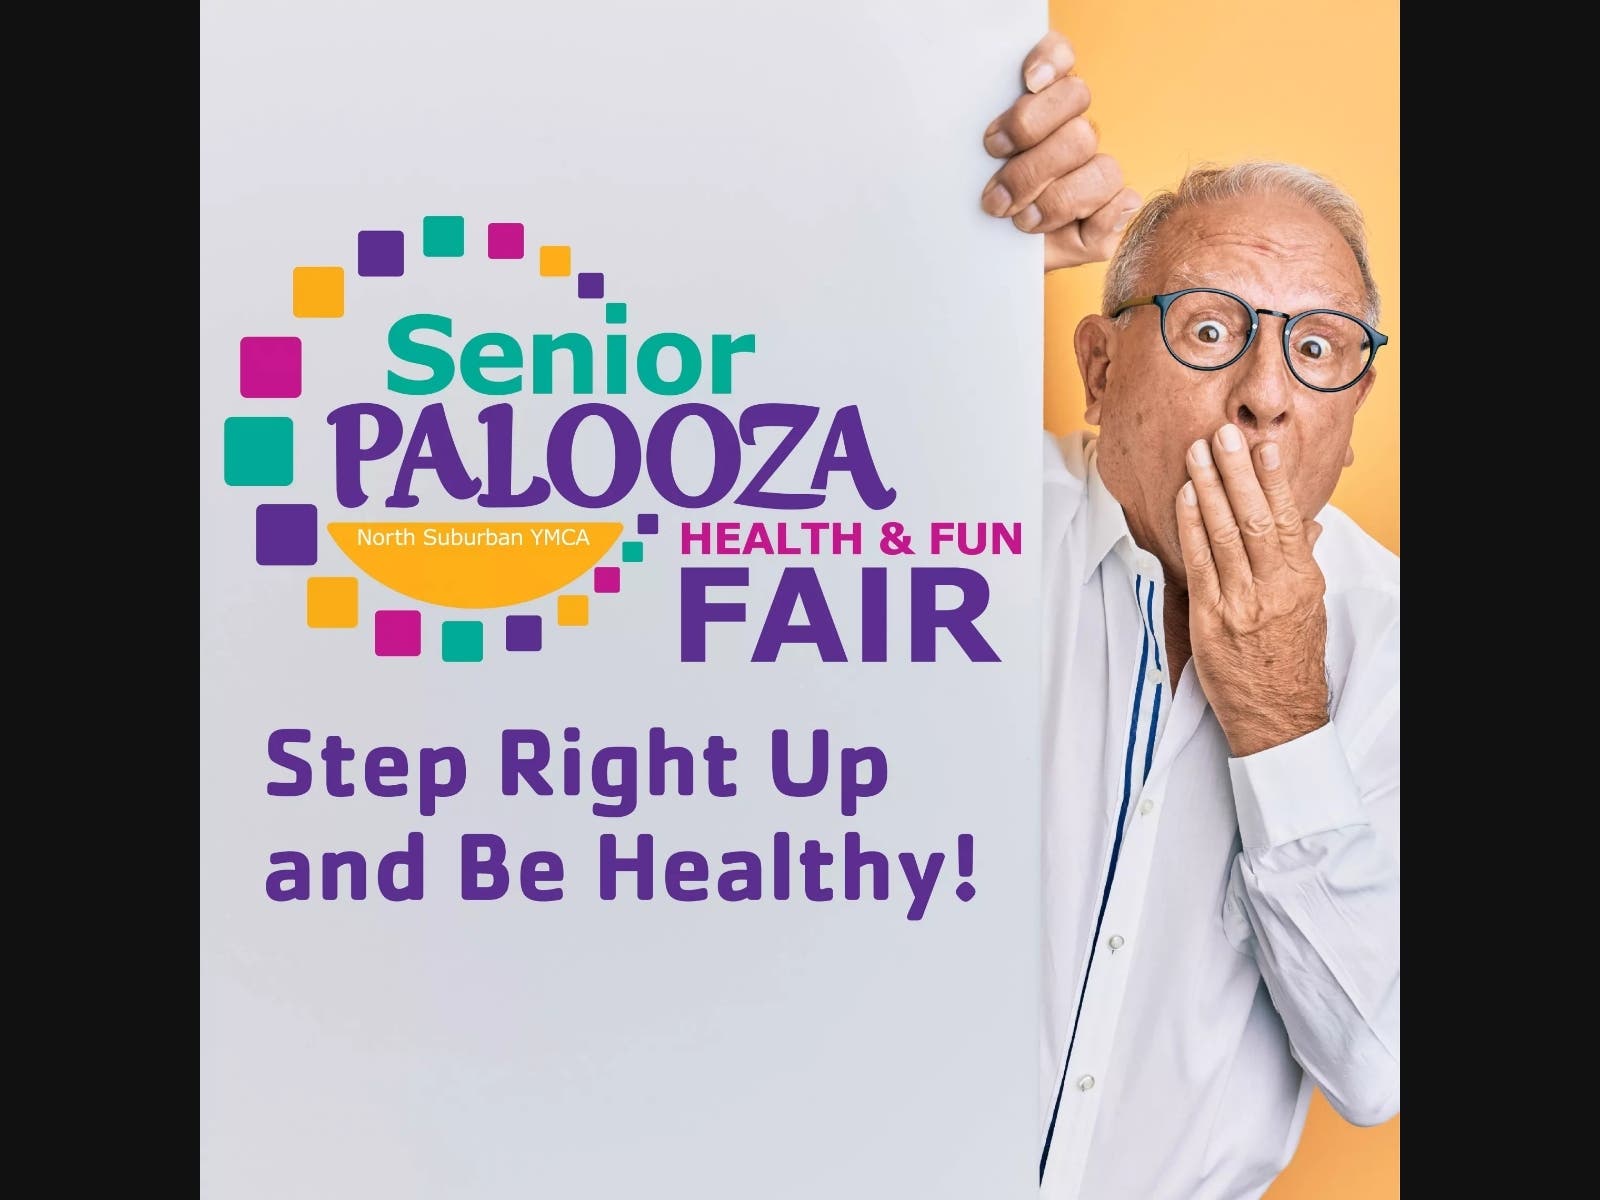 On September 14, the North Suburban YMCA will host Seniorpalooza, a free health and fun fair from 12 – 3 pm.